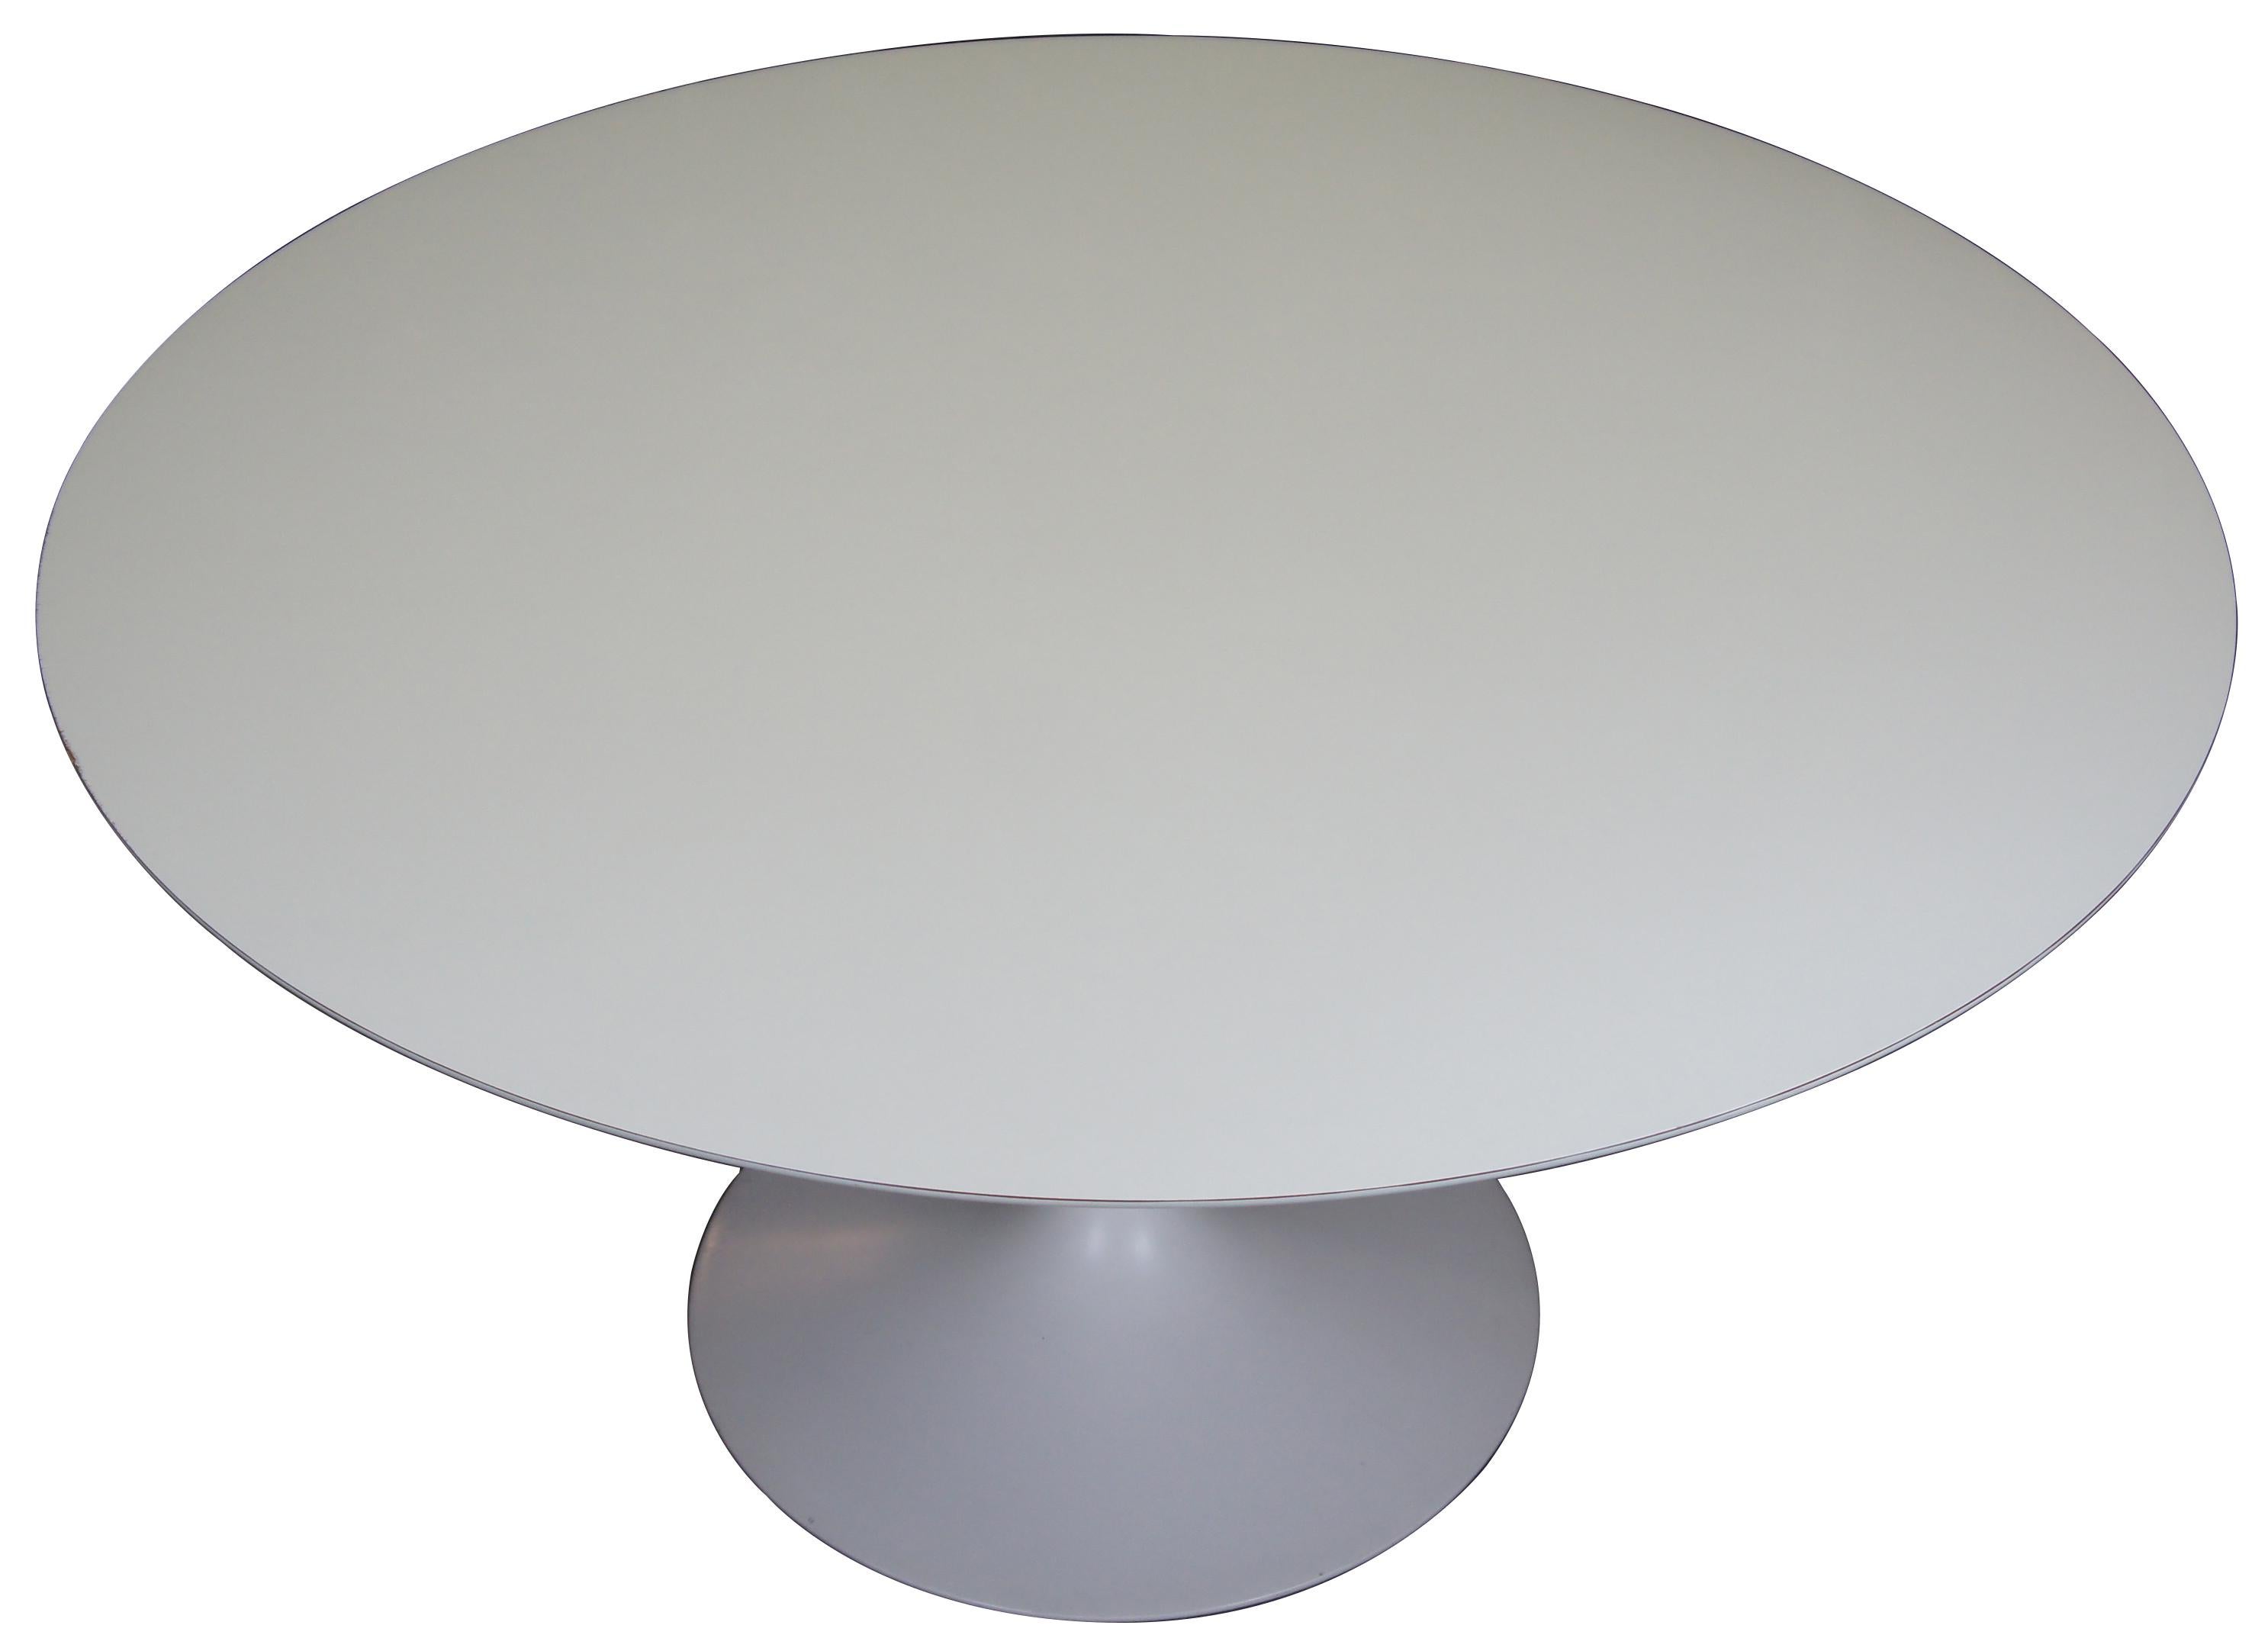 Original mid century round tulip dining table by Eero Saarinen for Knoll International. Made in Italy.
  